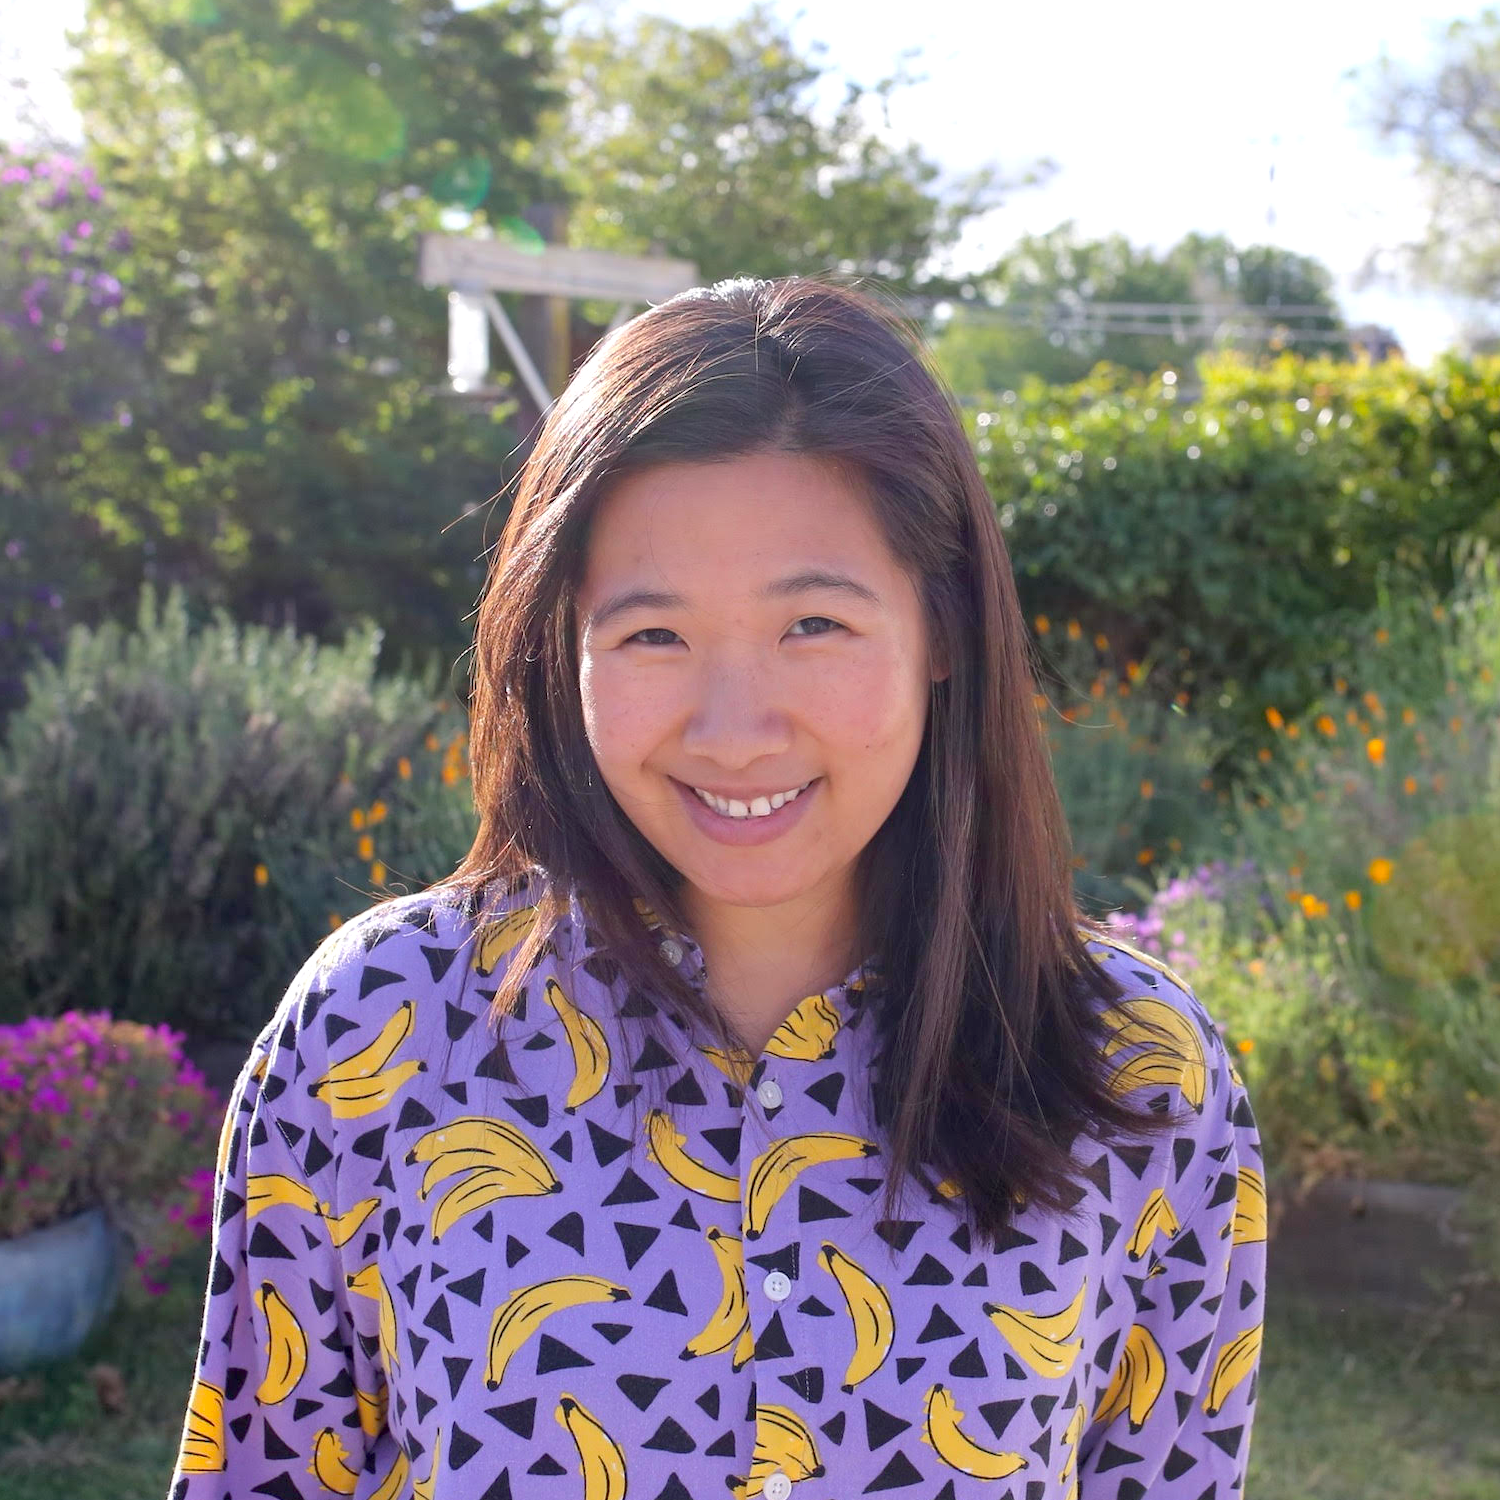 smiling woman wearing purple shirt with banana print in front of green plants